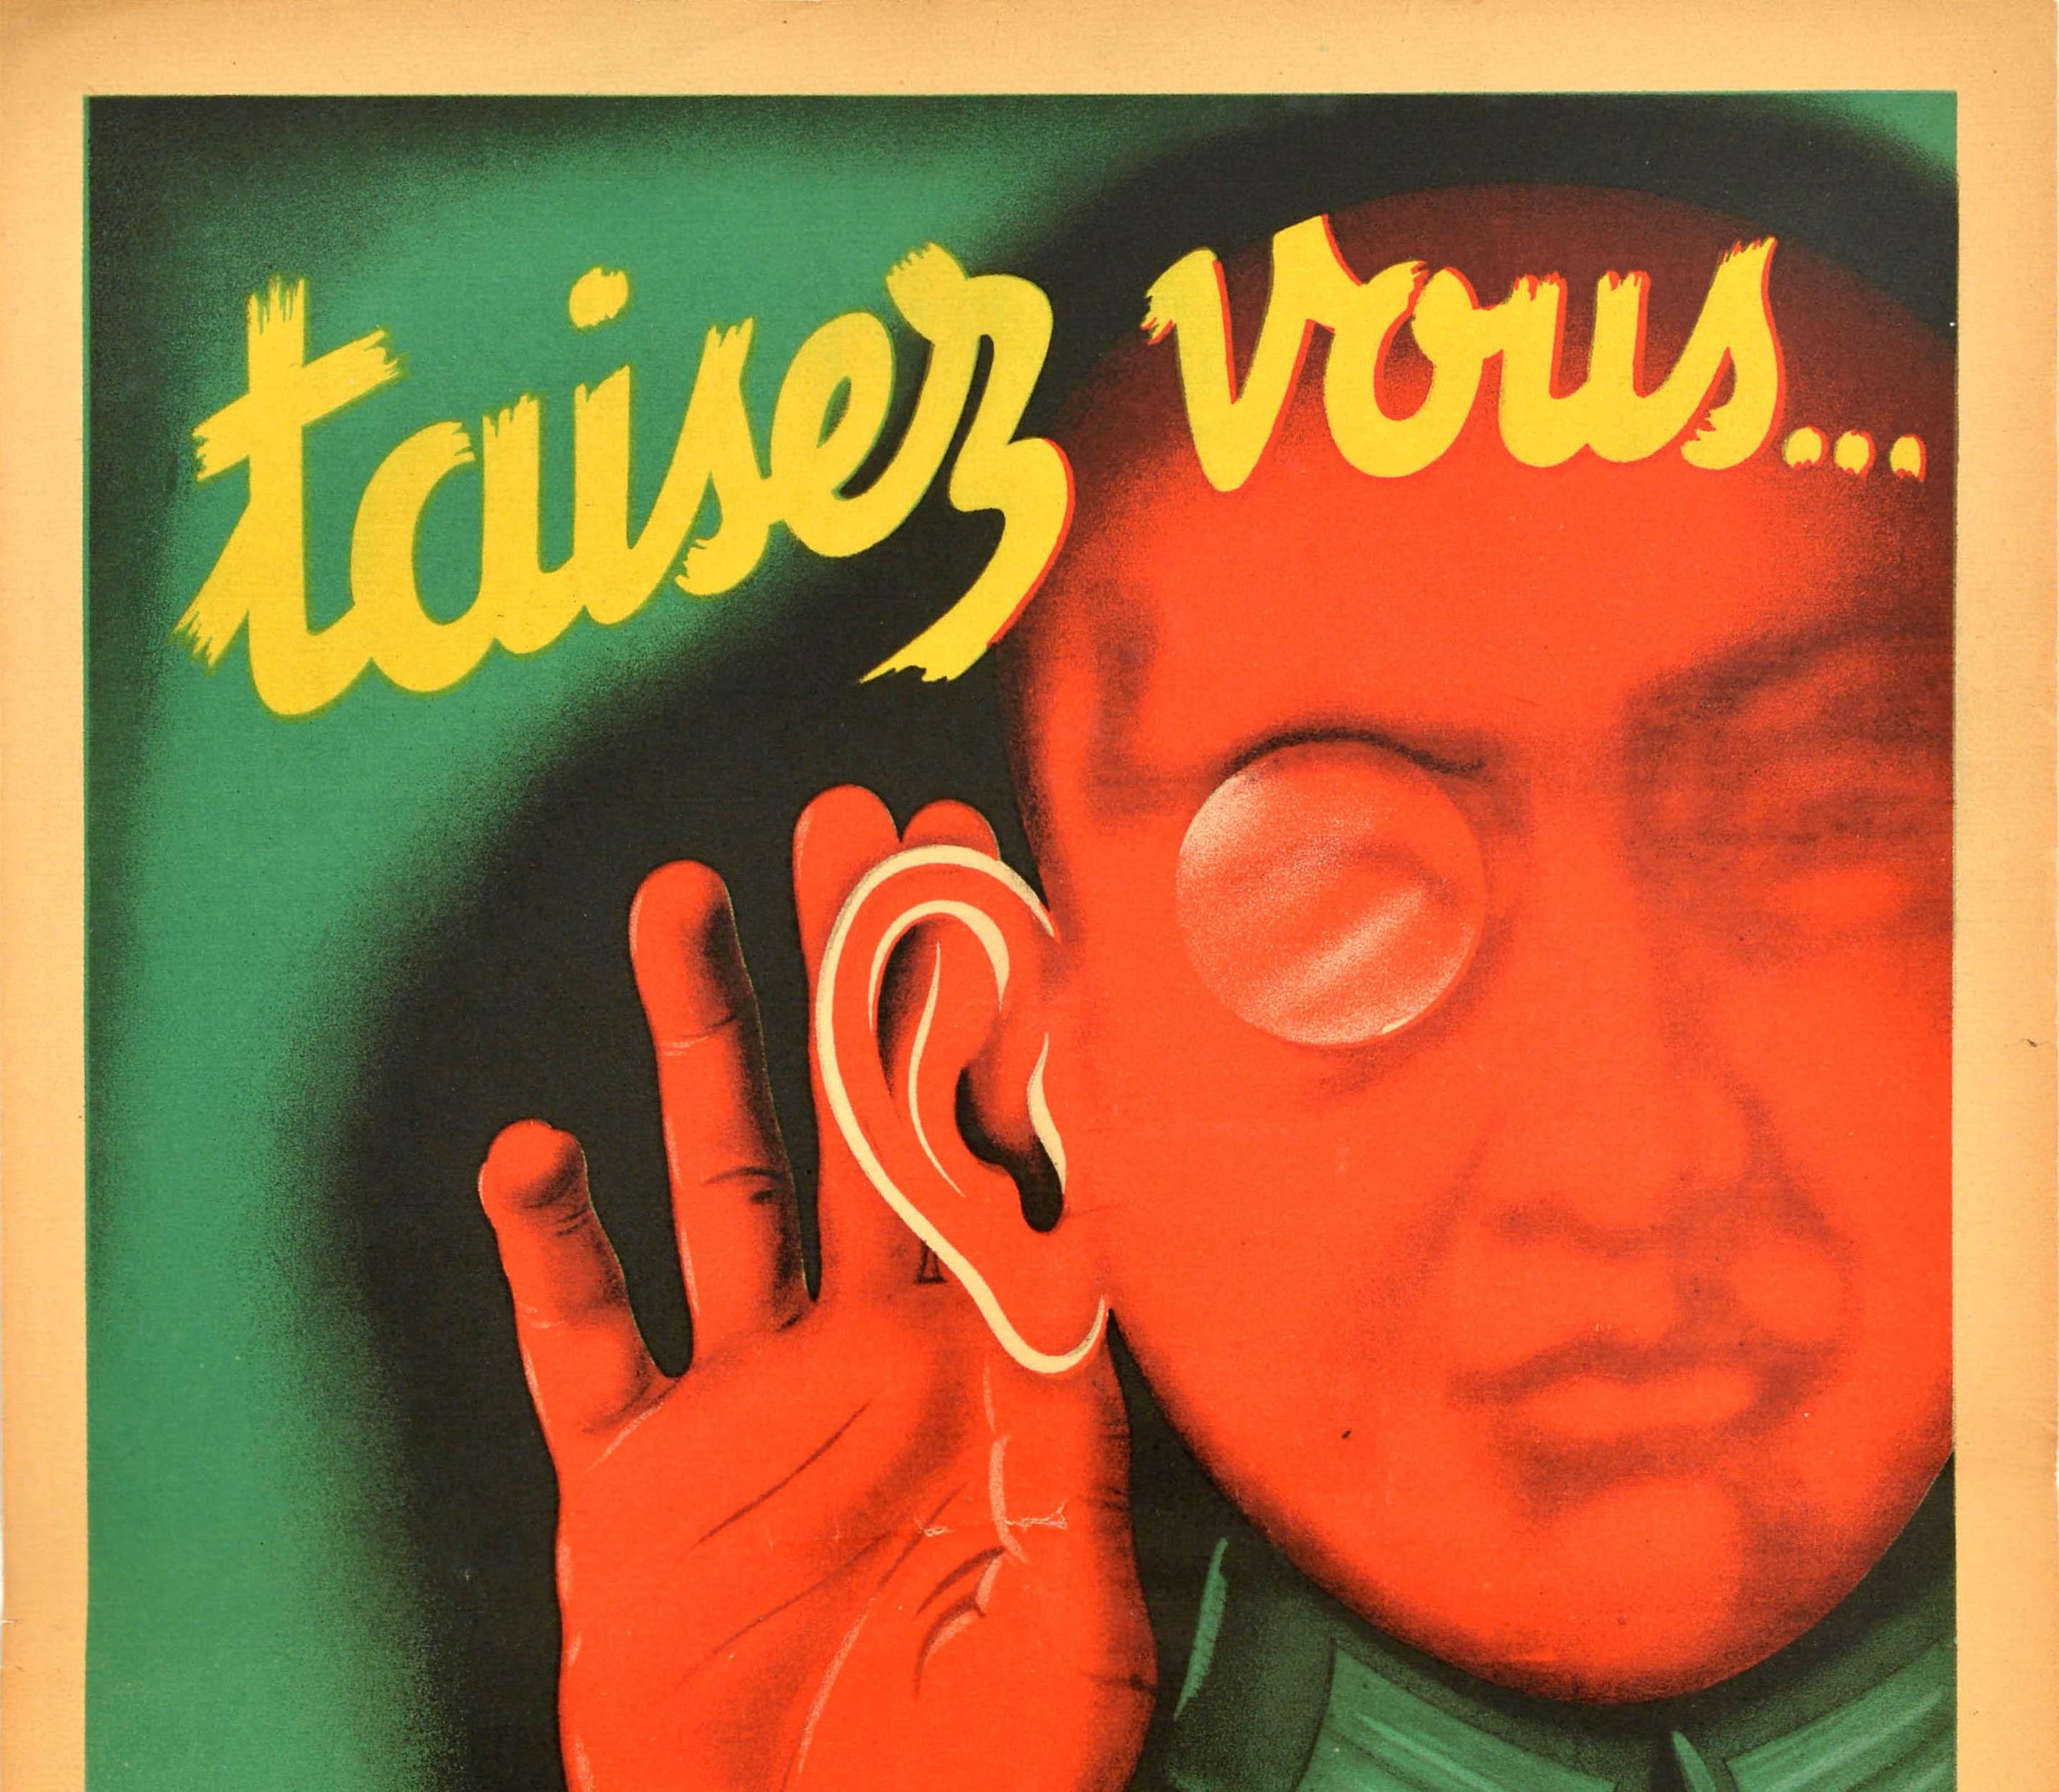 Original Vintage Poster Taisez Vous Be Quiet Spies Remain Post WWII Occupation - Print by M. Mallet